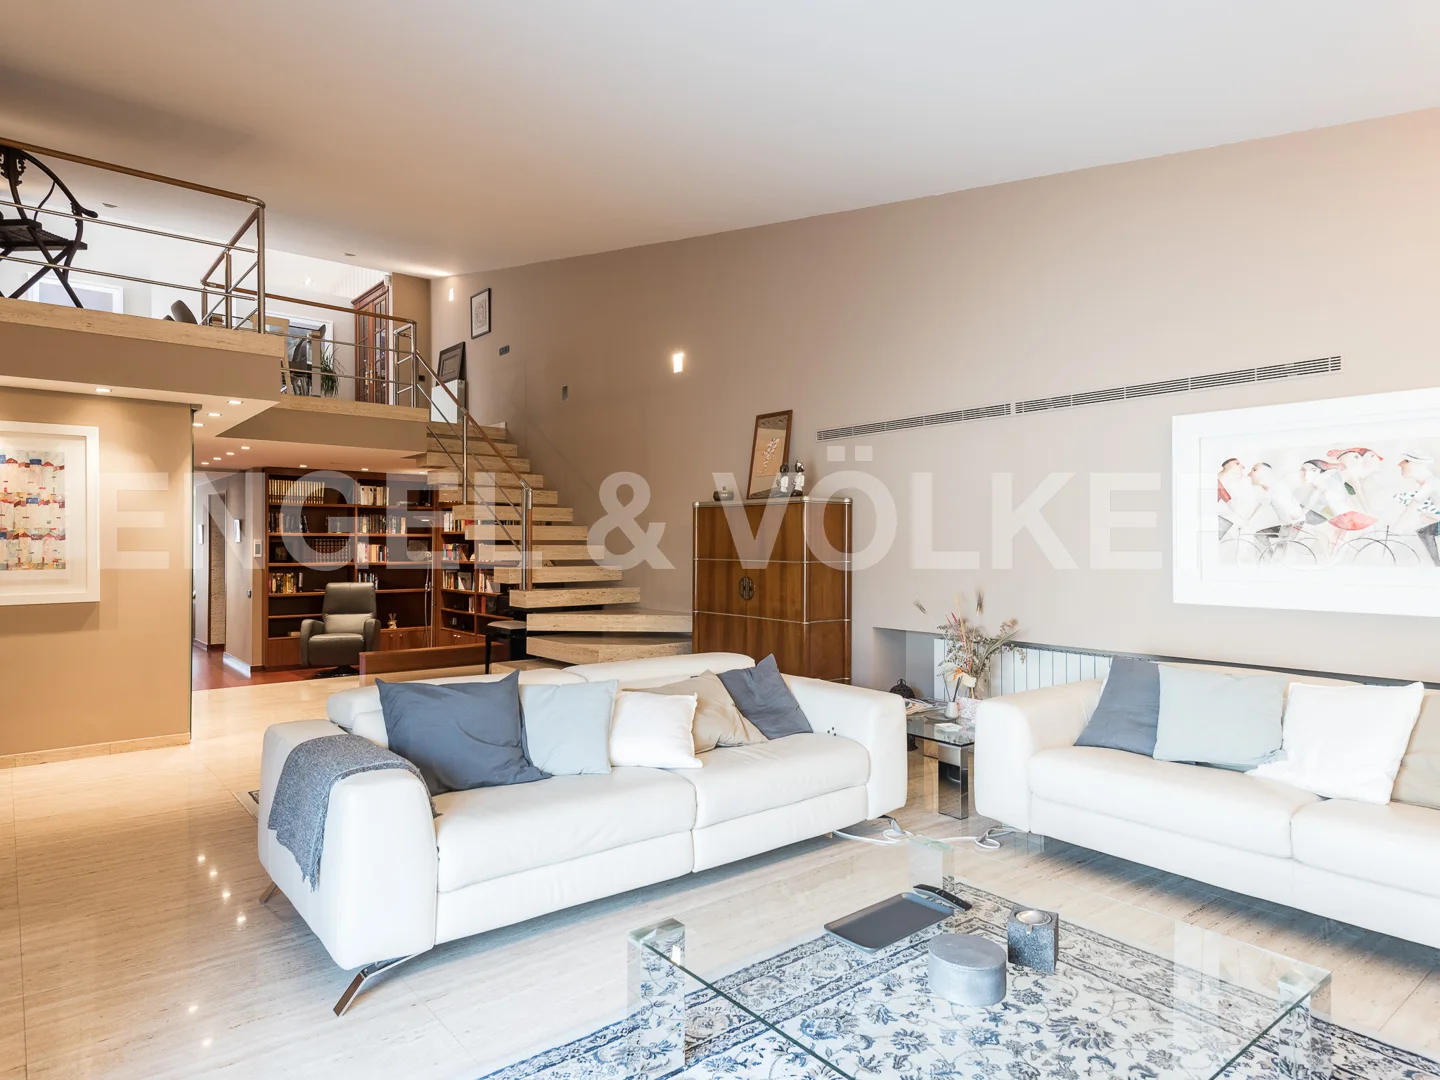 Exclusive Penthouse in the center of Mataró